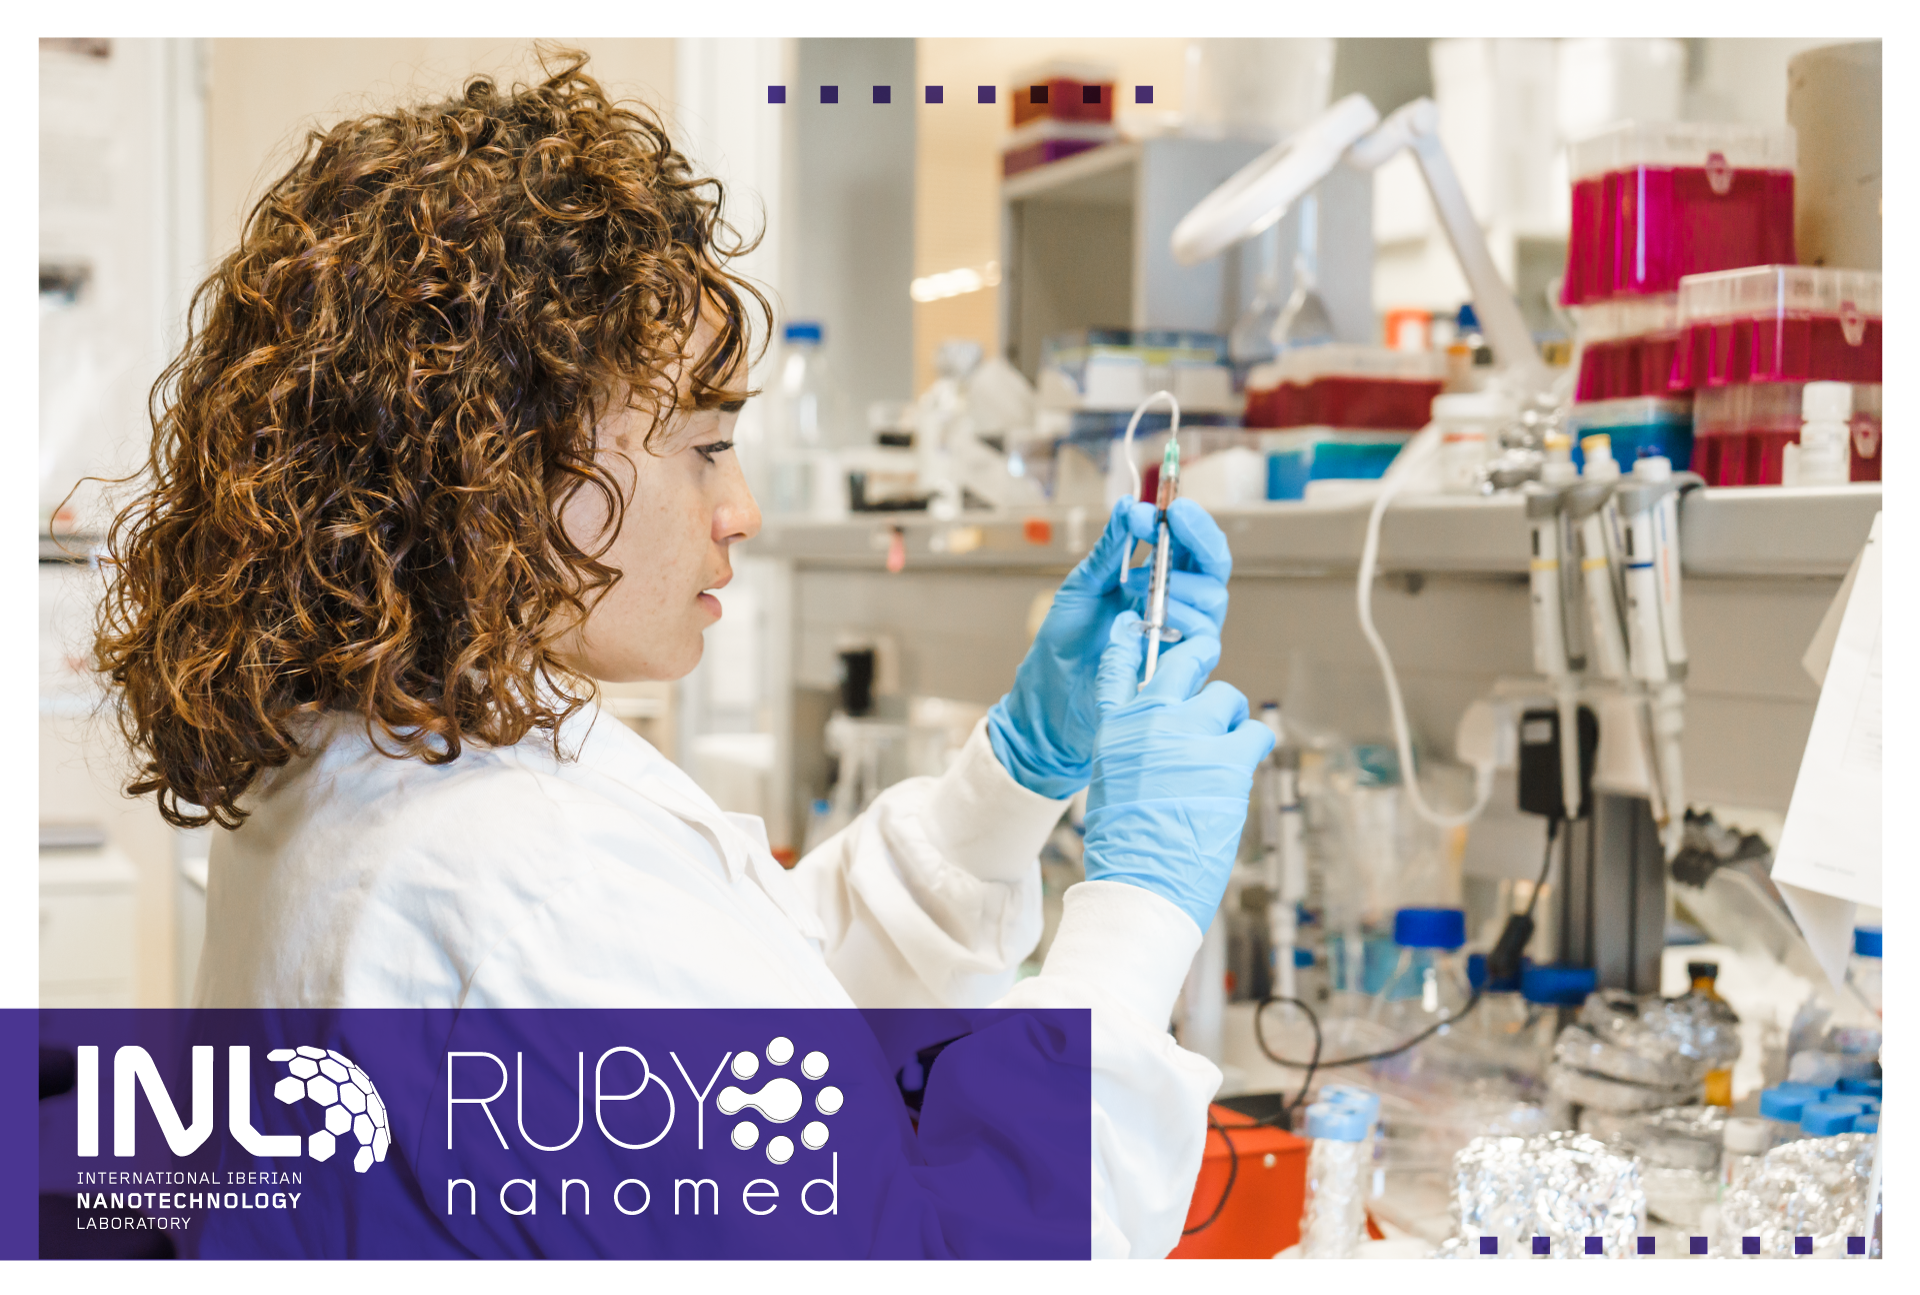 INL and RUBYnanomed get support from La Caixa Foundation for research against cancer